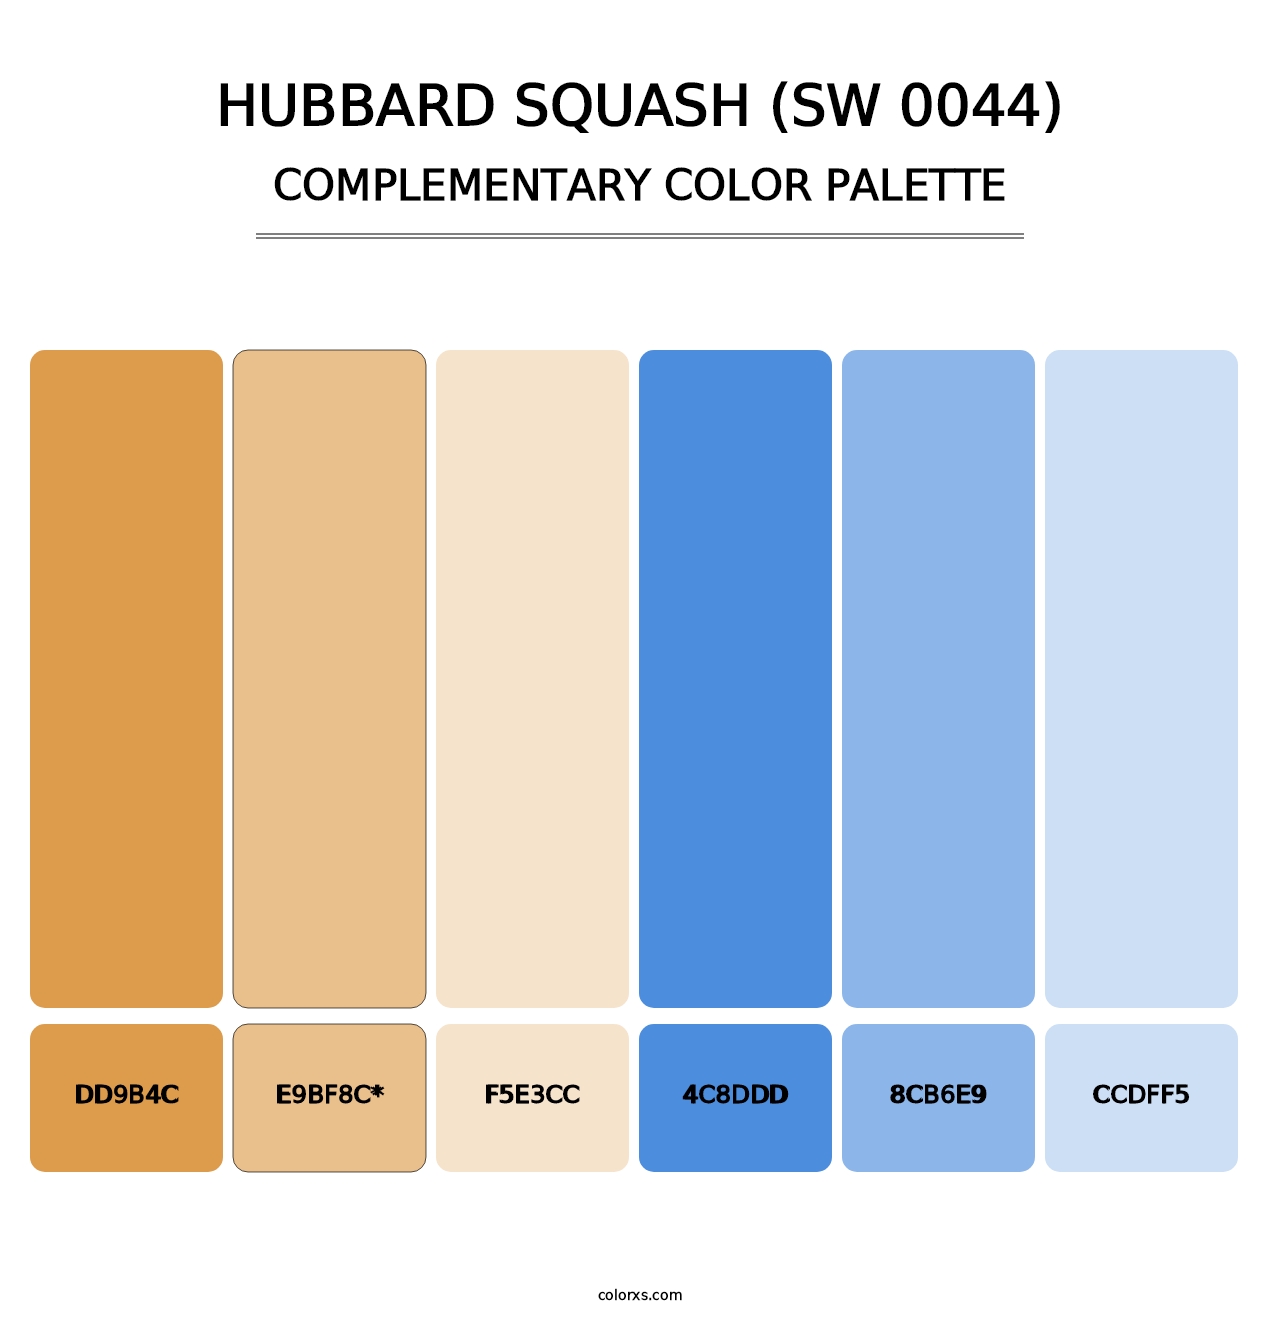 Hubbard Squash (SW 0044) - Complementary Color Palette